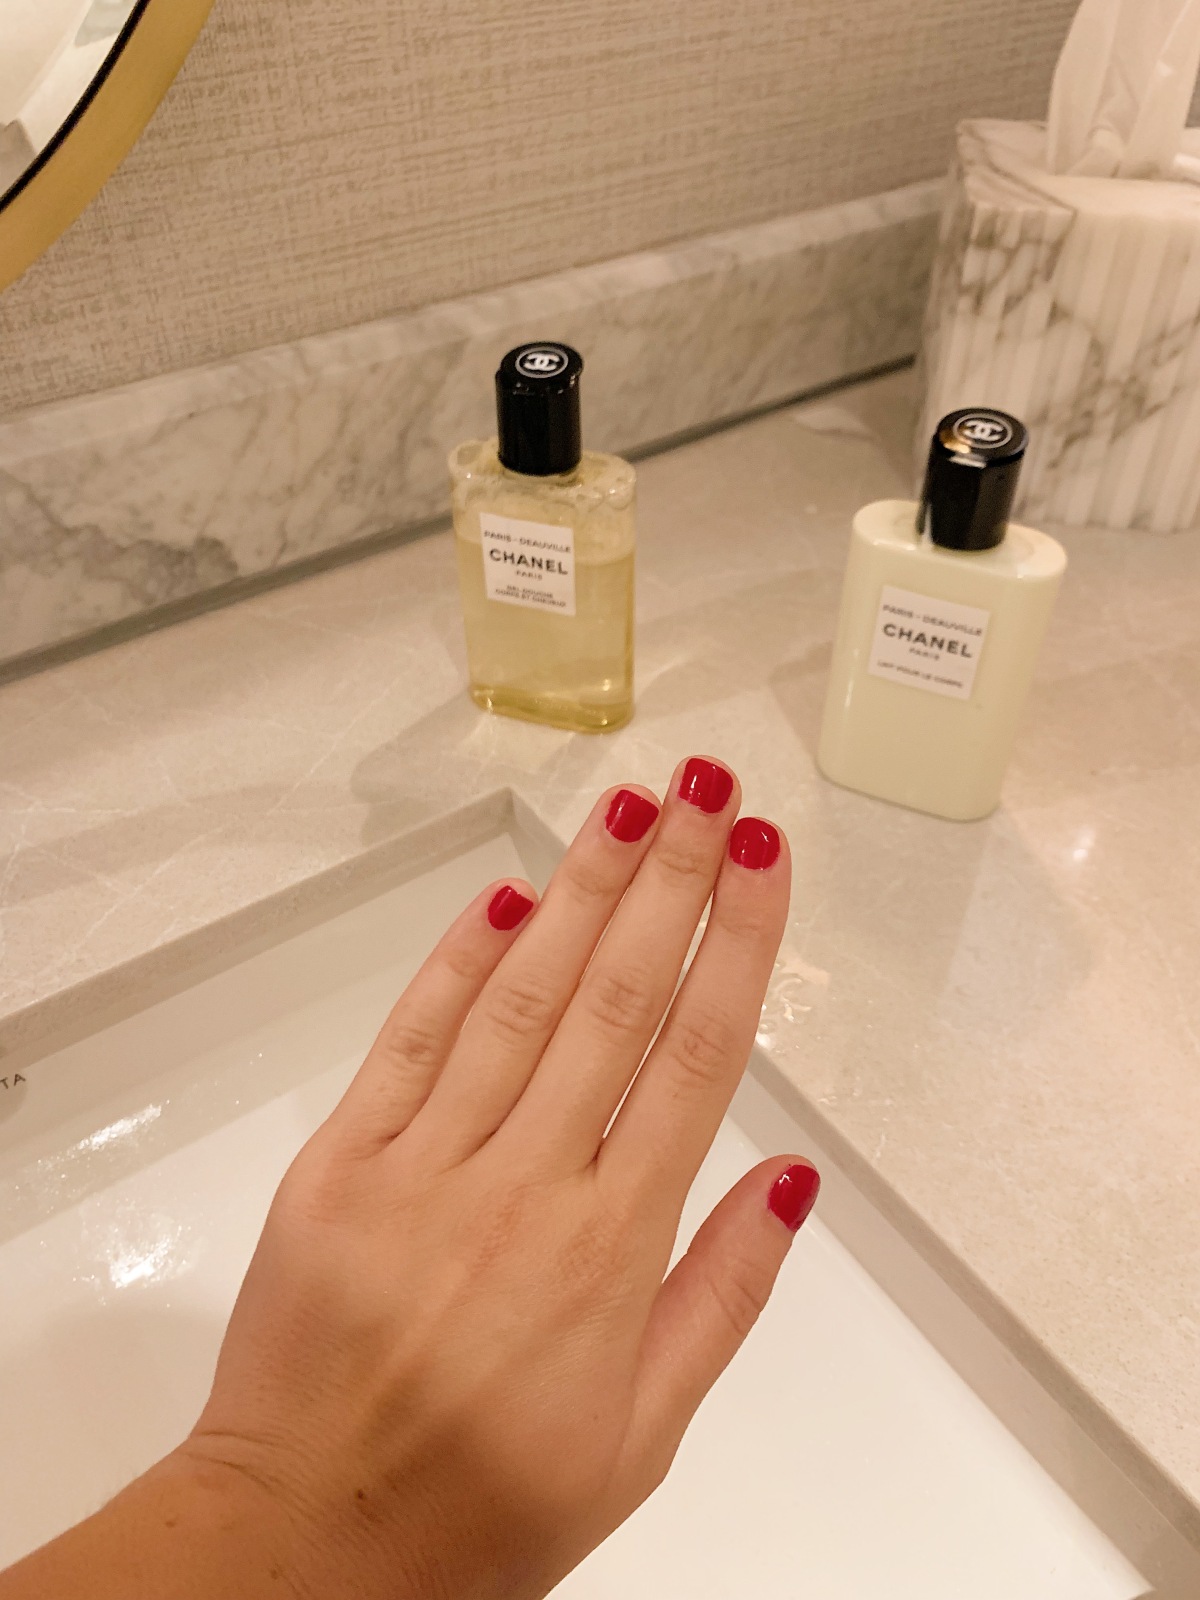 Chanel Beauty, Chanel perfume, Chance by Chanel, Palisades Village, Pacific Palisades shopping, beauty event, LA events, style blogger, beauty blogger, lifestyle blogger, lookbook, ootd, Chanel, vintage, luxury, self care